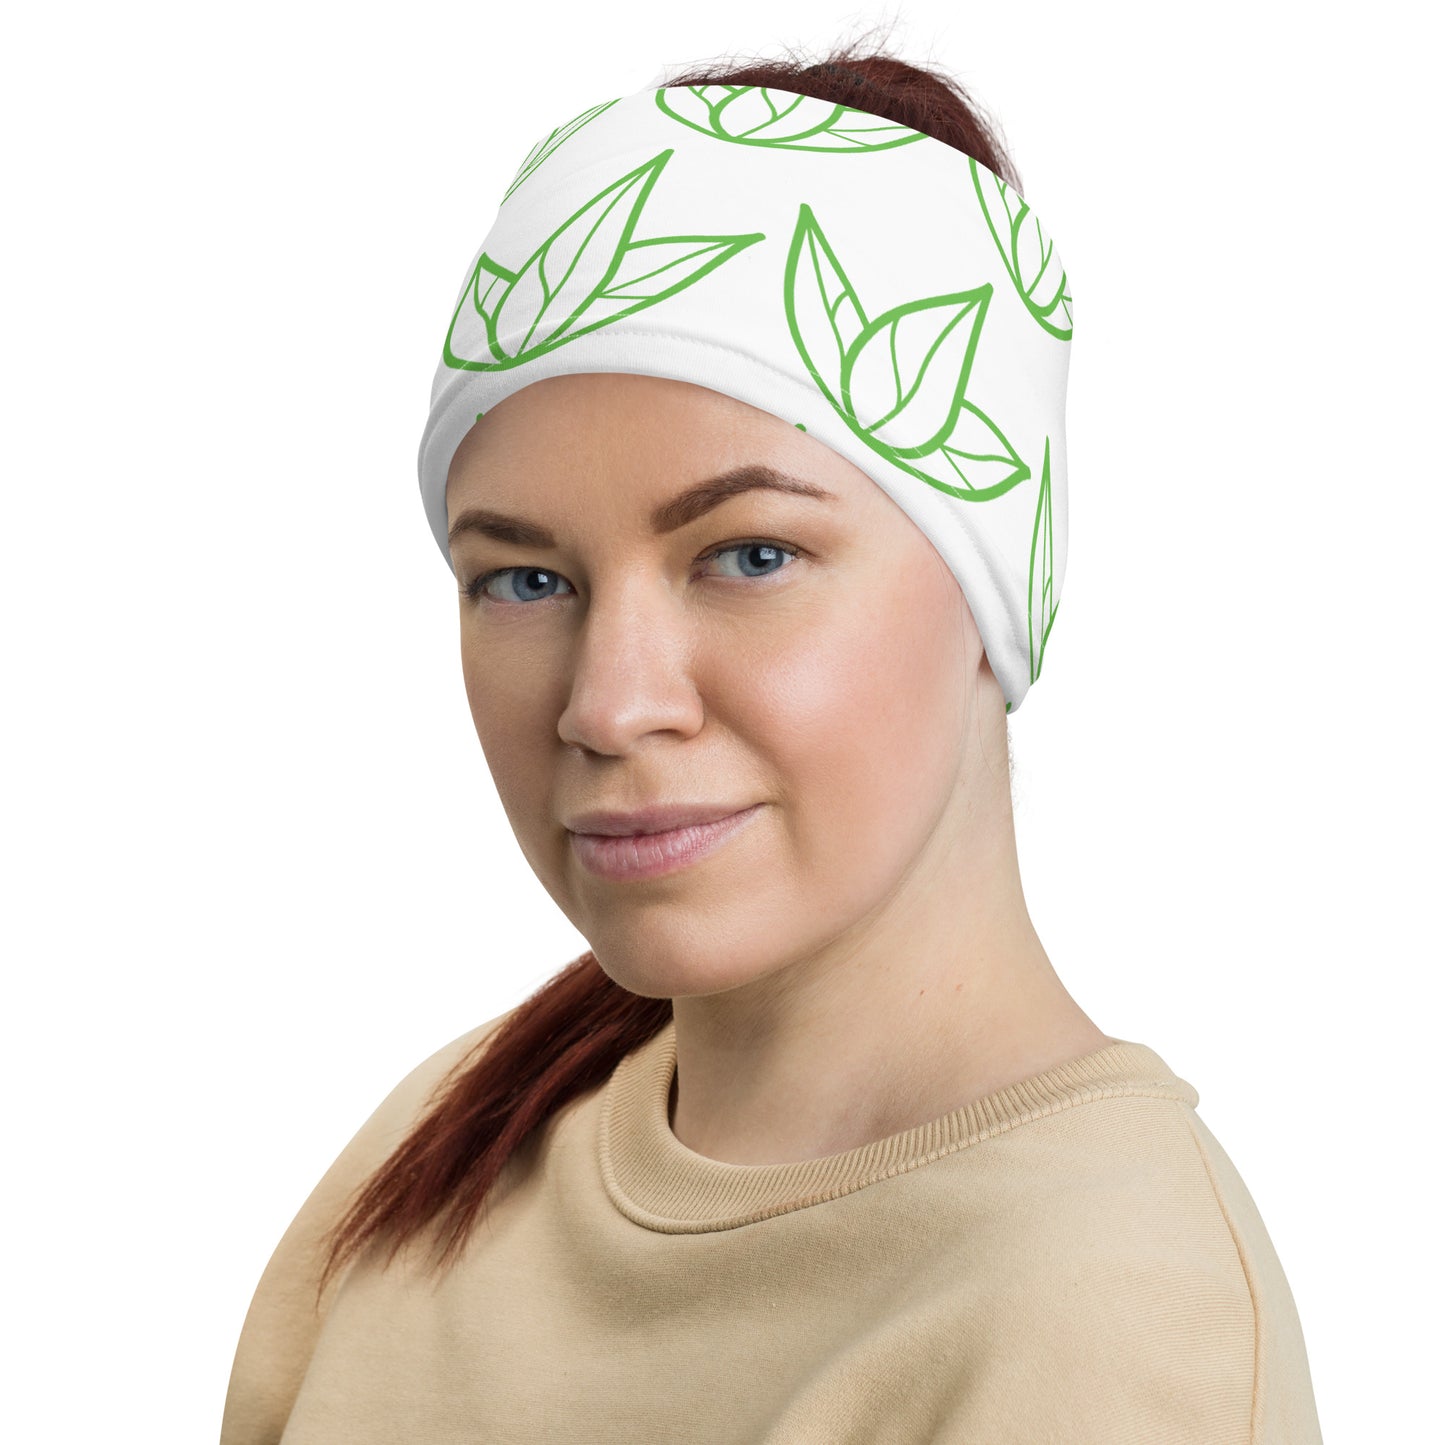 Vibrant Visions - Organic Health & Wellness - High Quaity, Soft-touch Neck Gaiter, UV Protection sport style compression sleeve cap.